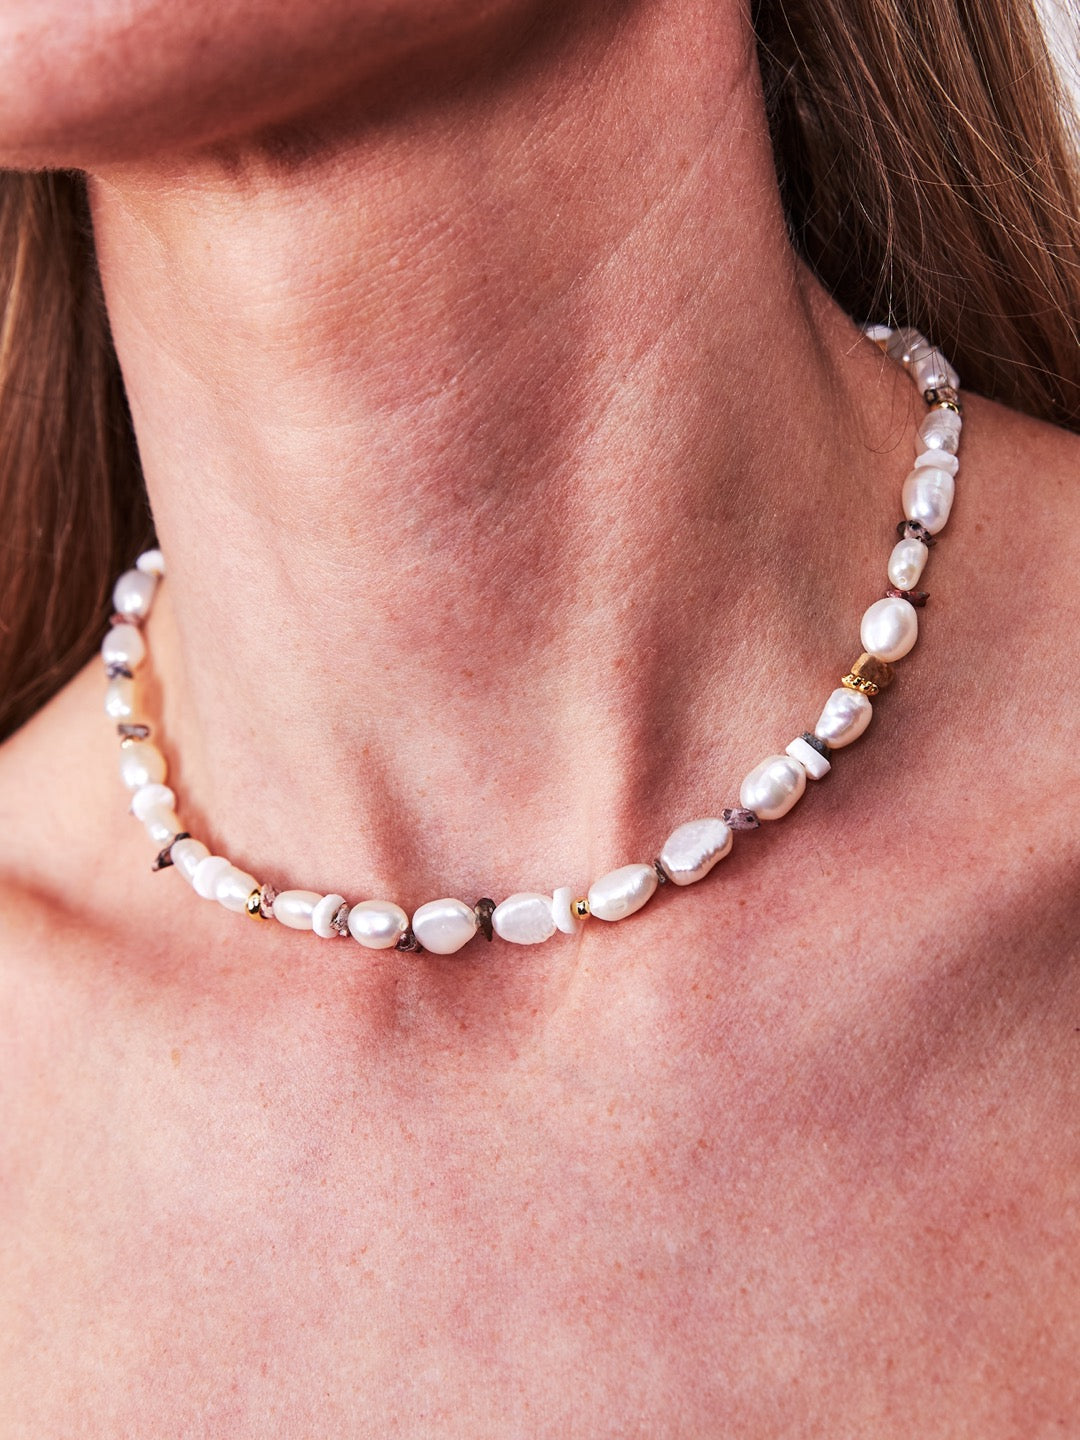 Love Bead Necklace - Leopard Pearl